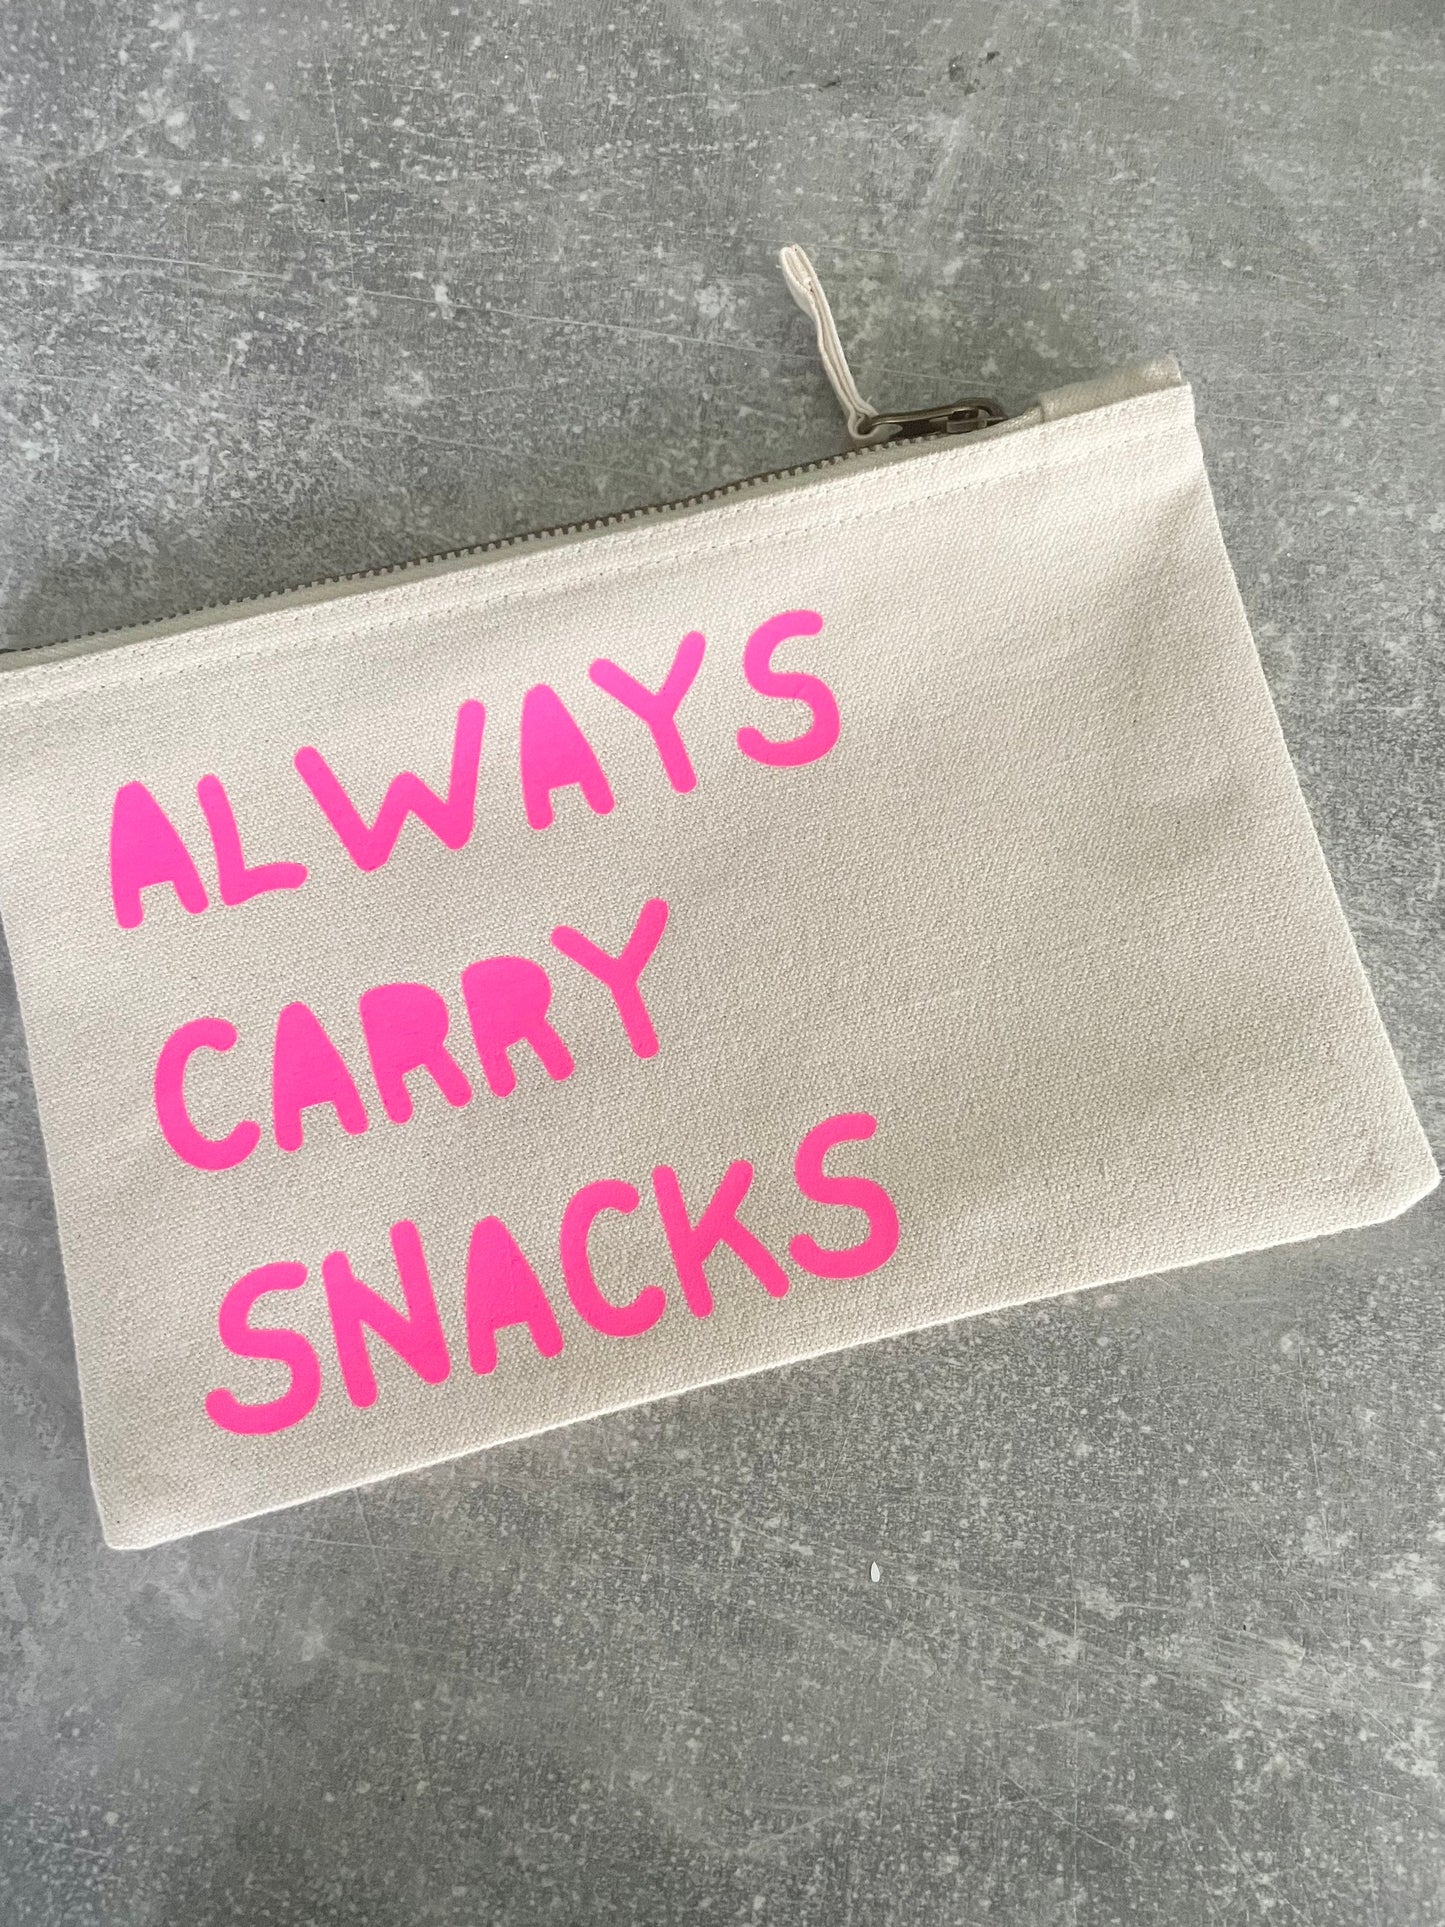 Always Carry Snacks pouch, snack bag for mums on the go, mum birthday gift, friend novelty gifts, work wife colleague new job gift